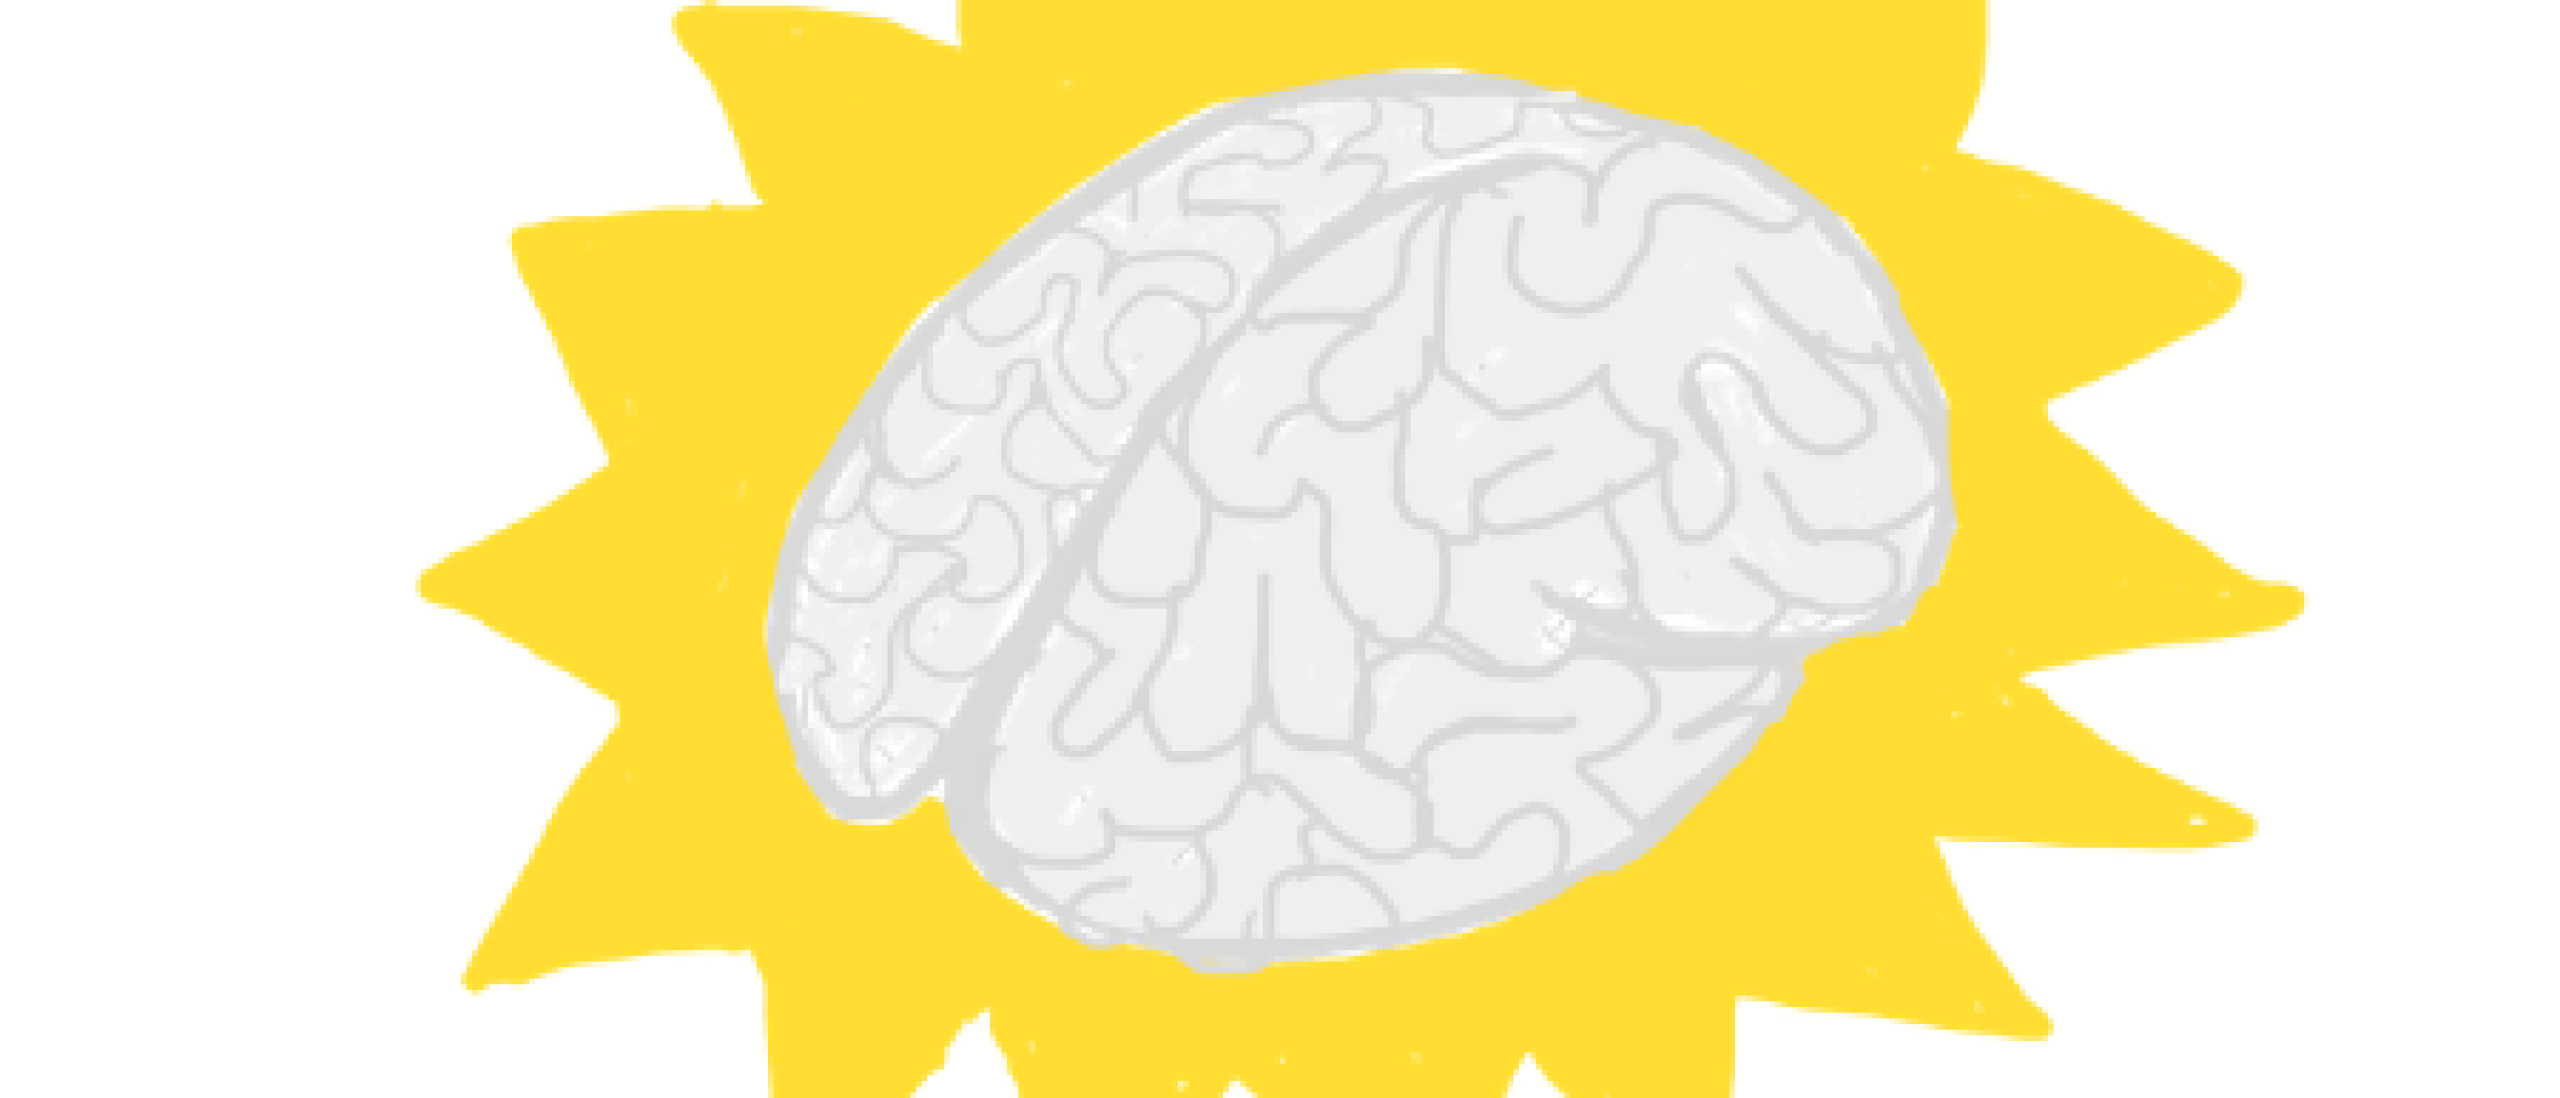 How to change your rainy brain into a sunny brain